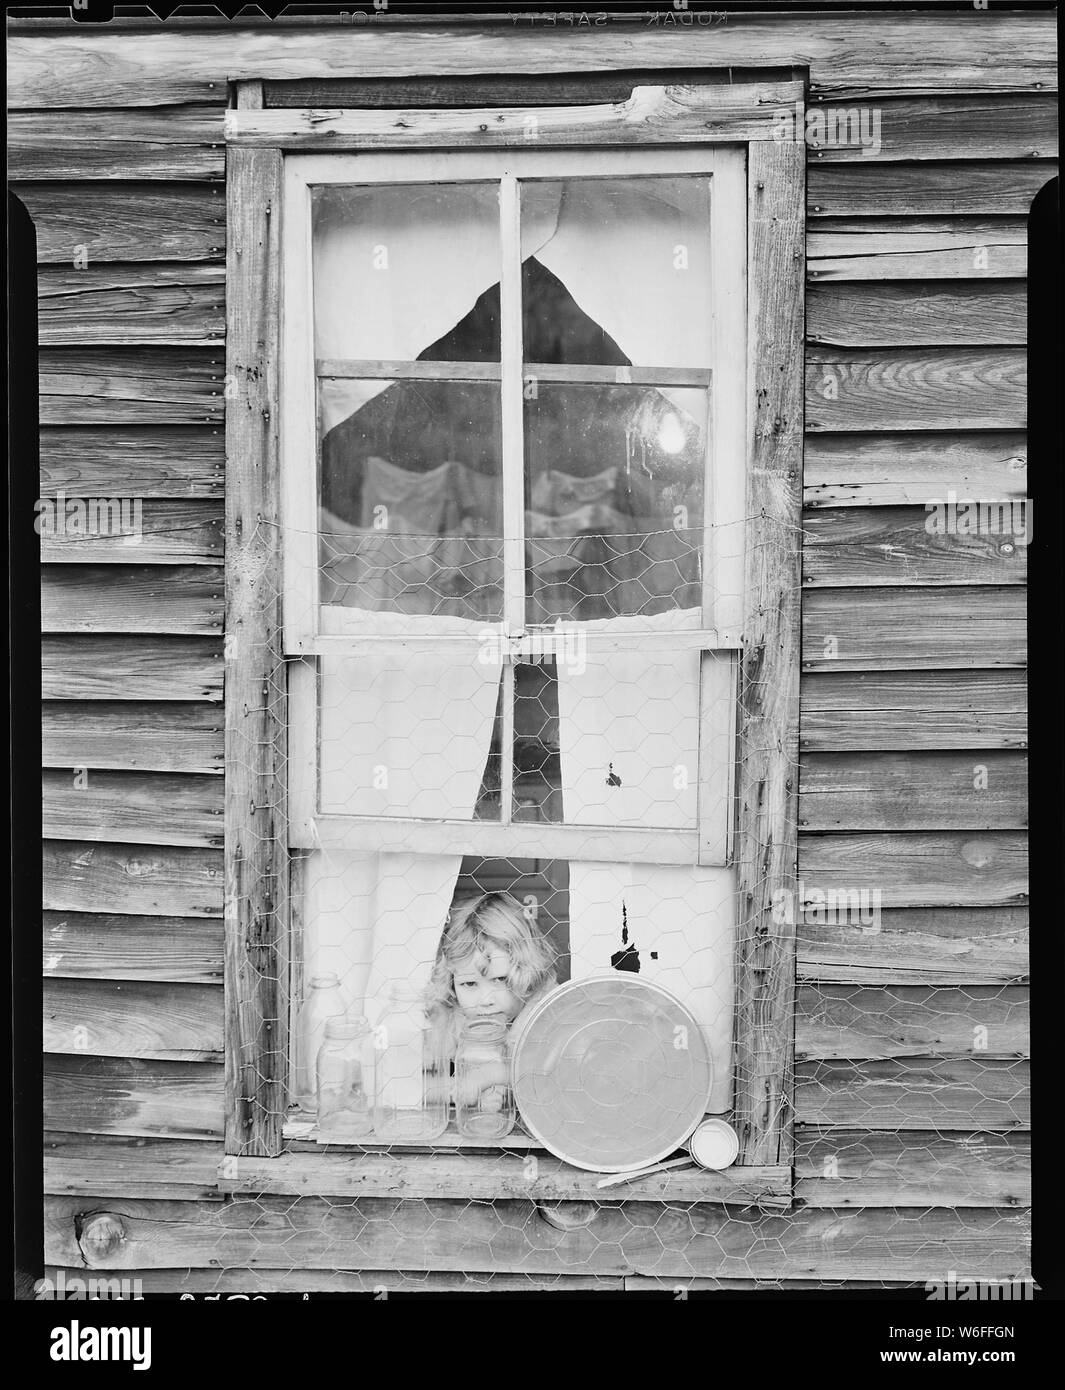 Bobbie Jean Sergent looking out the kitchen window. P V & K Coal Company, Clover Gap Mine, Lejunior, Harlan County, Kentucky. Stock Photo